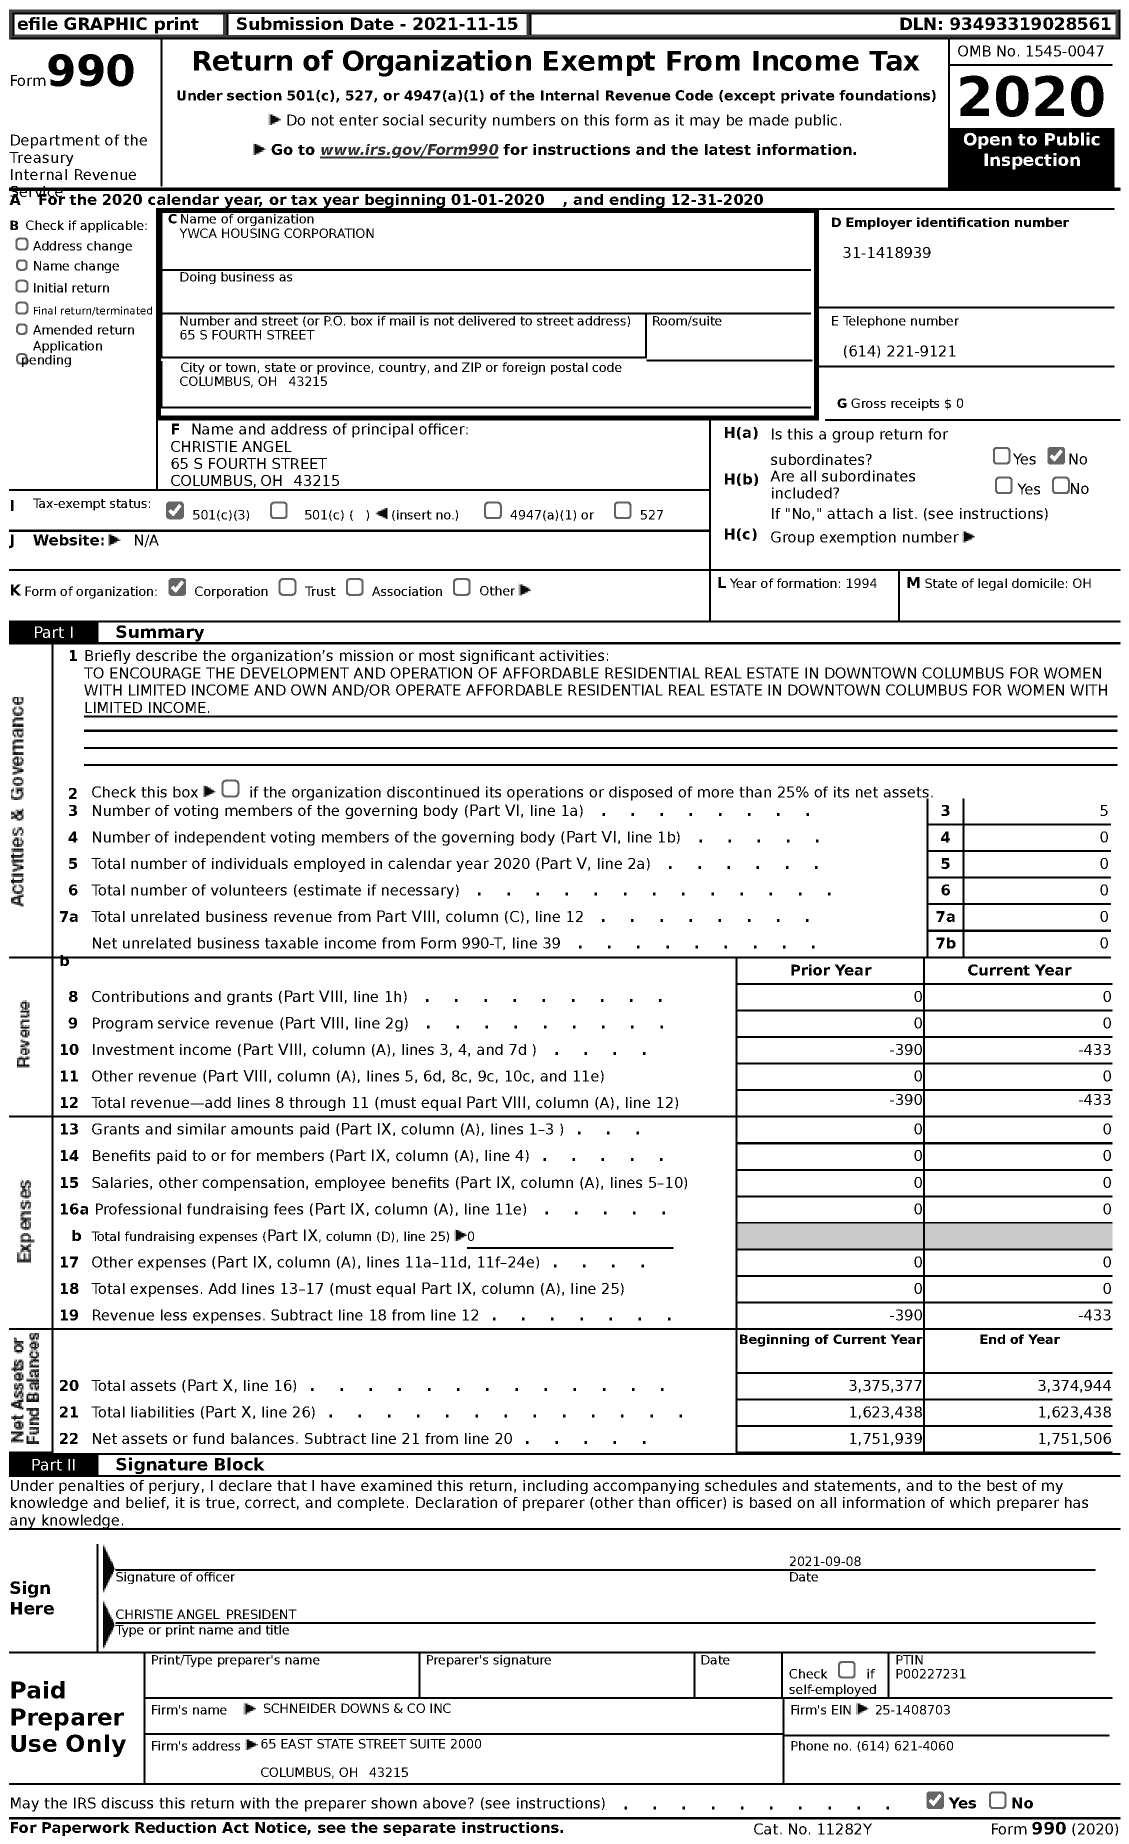 Image of first page of 2020 Form 990 for Ywca Housing Corporation